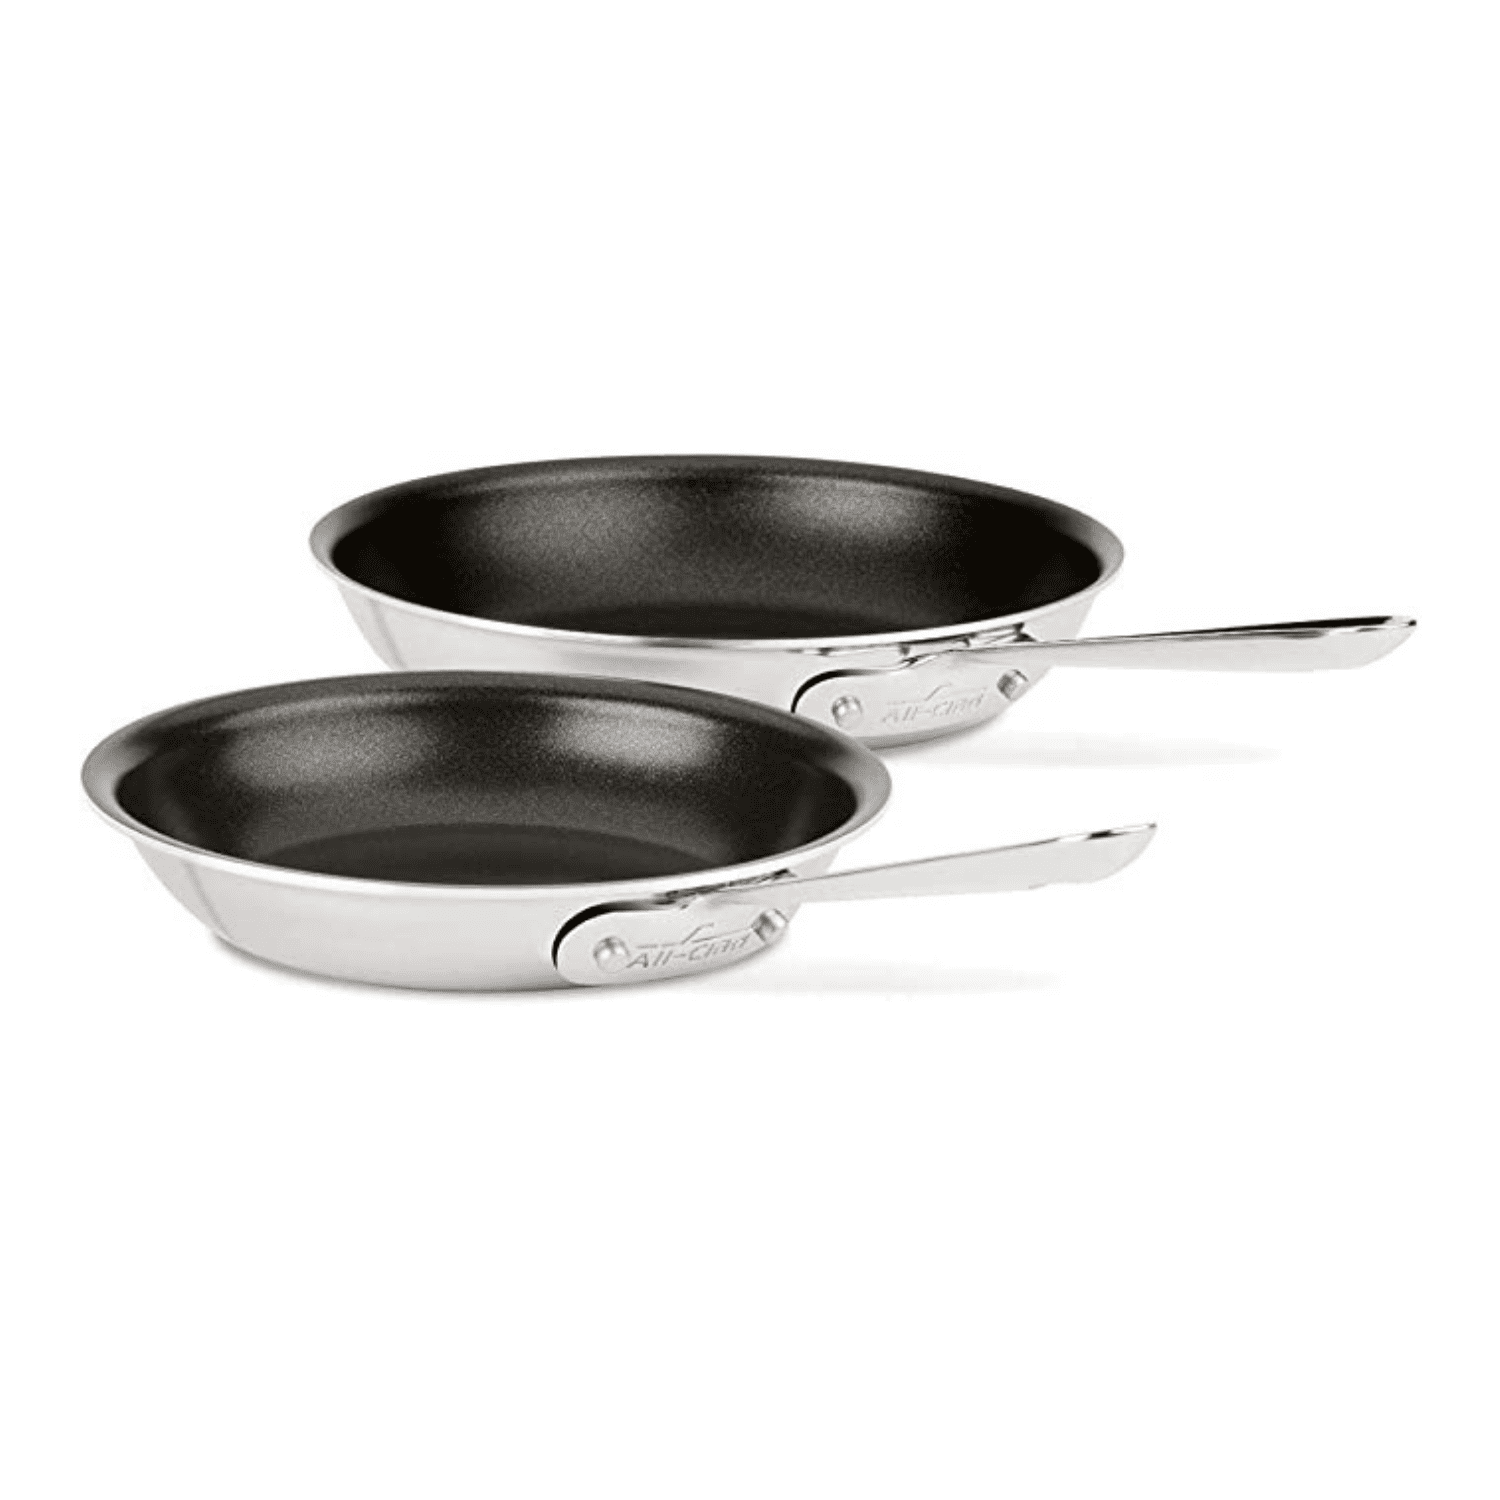 All-Clad Nonstick 8-Inch and 10-Inch Fry Pan Set